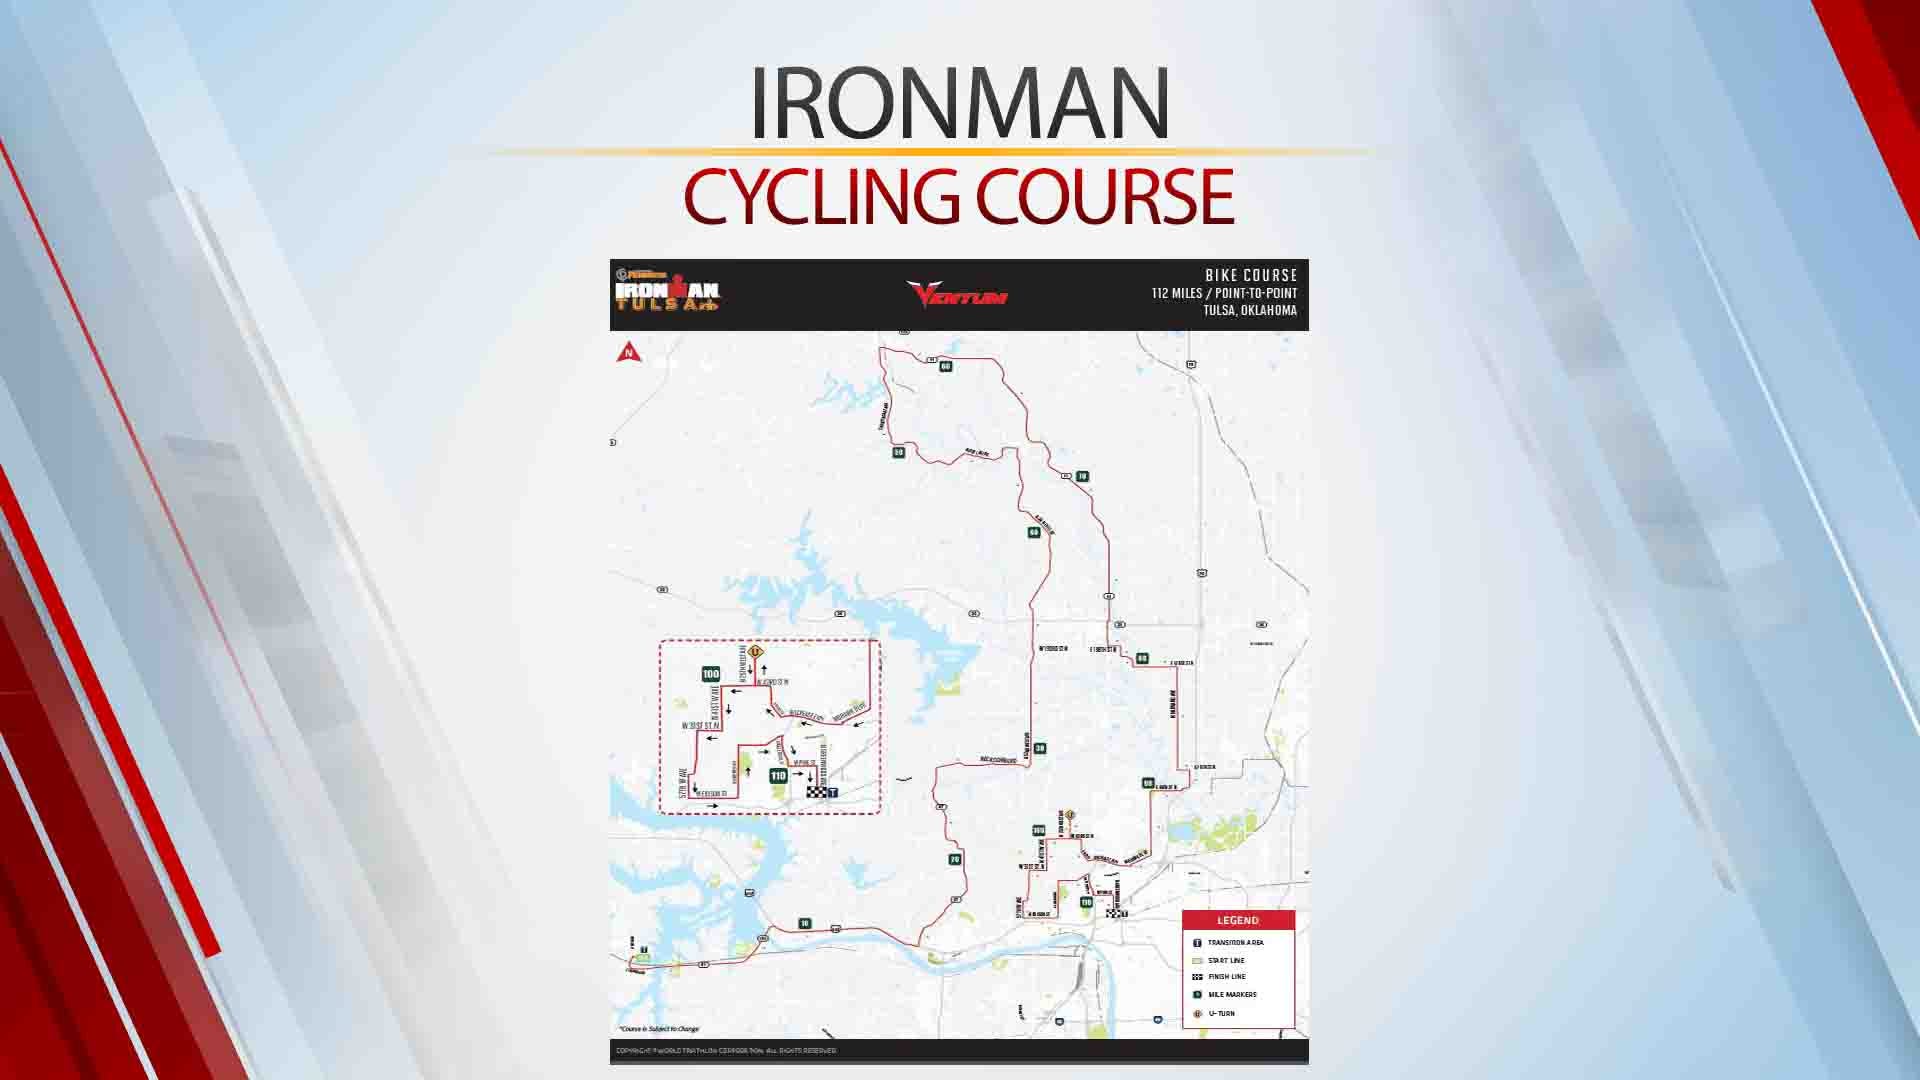 Ironman Reveals Cycling Course For May 2020